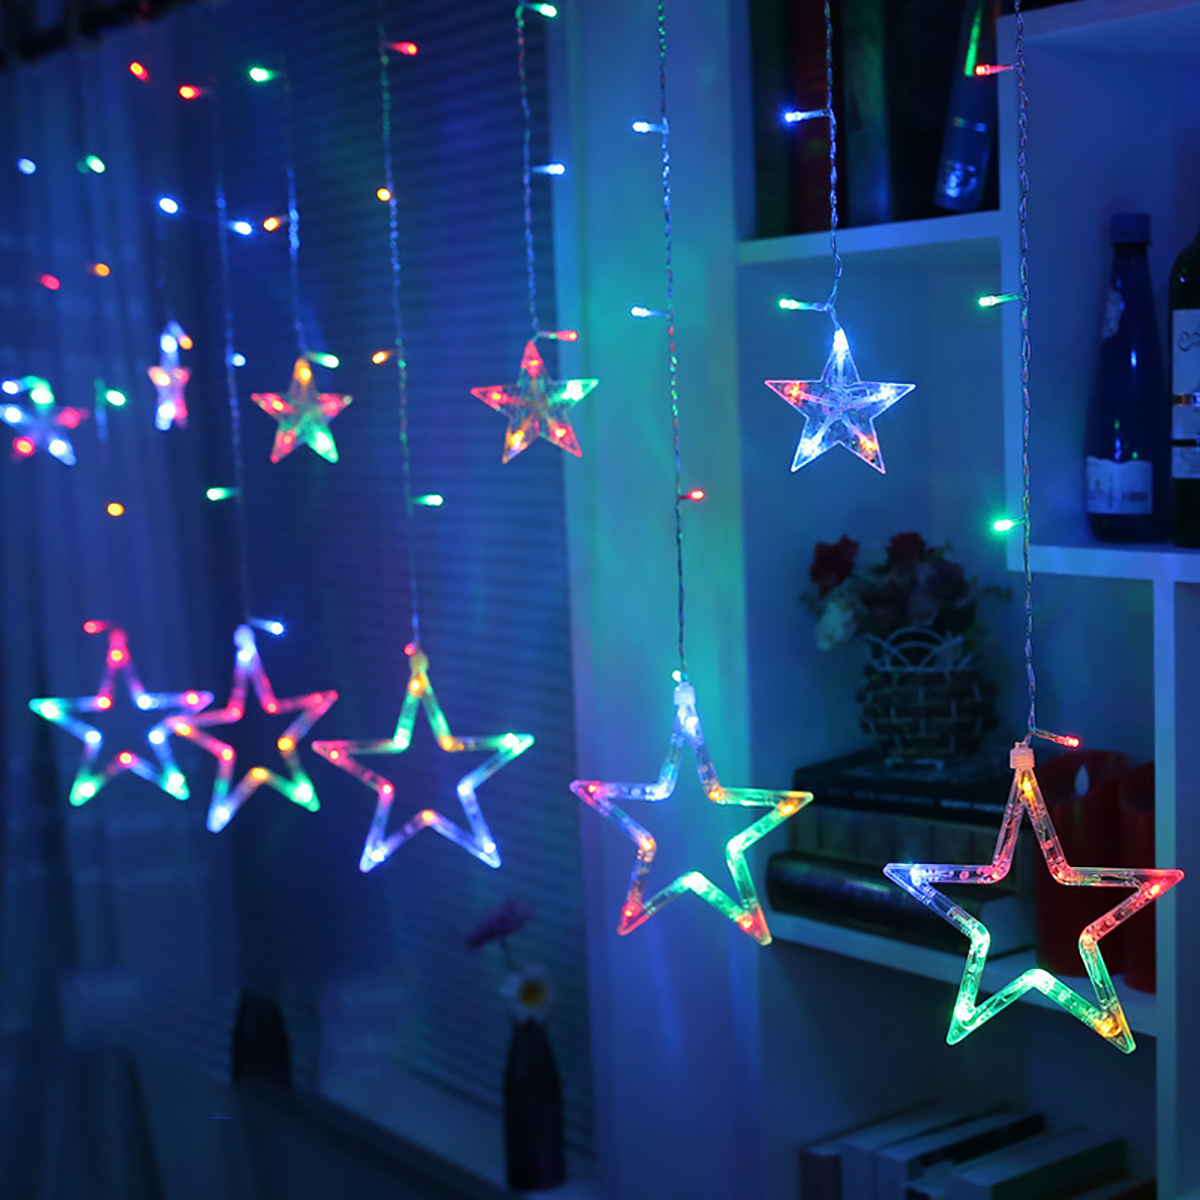 138LEDs-Star-Fairy-String-Light-House-Style-Colorful-Lamp-Wedding-Party-Holiday-Home-Christmas-Decor-1715911-7